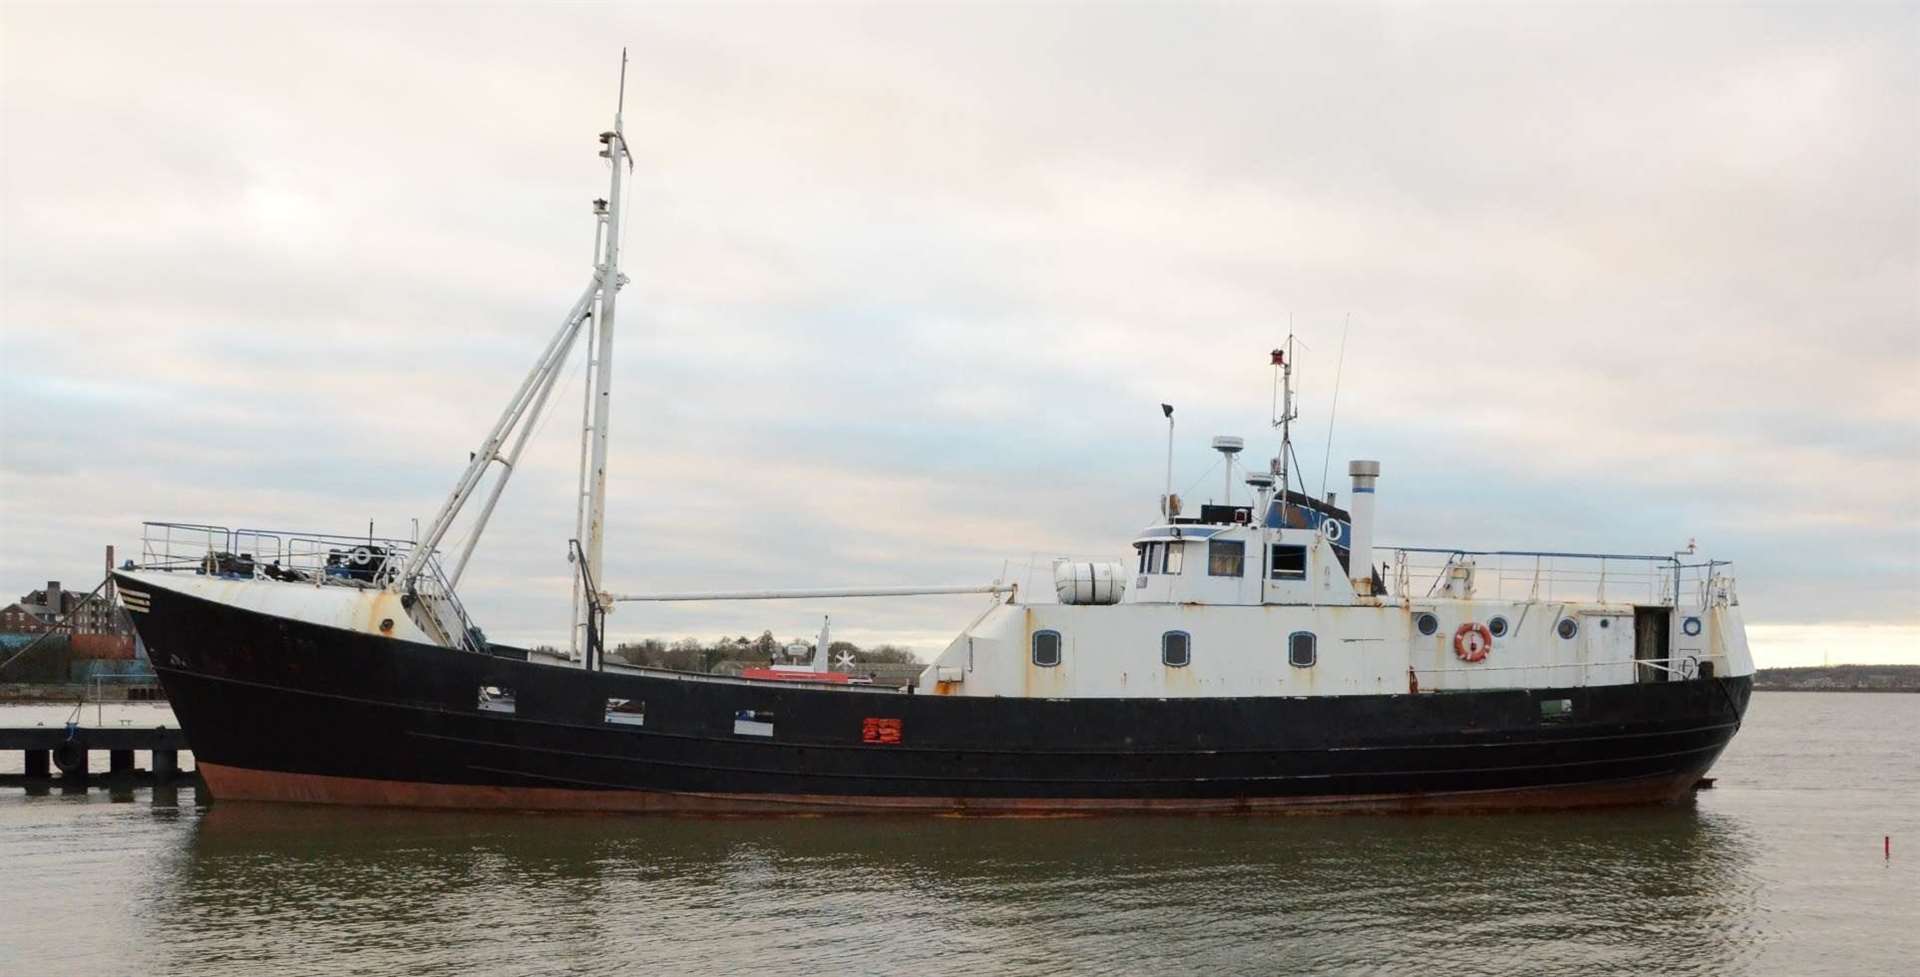 The Svanic trawler was bought in Latvia and described as "unseaworthy". Picture: NCA